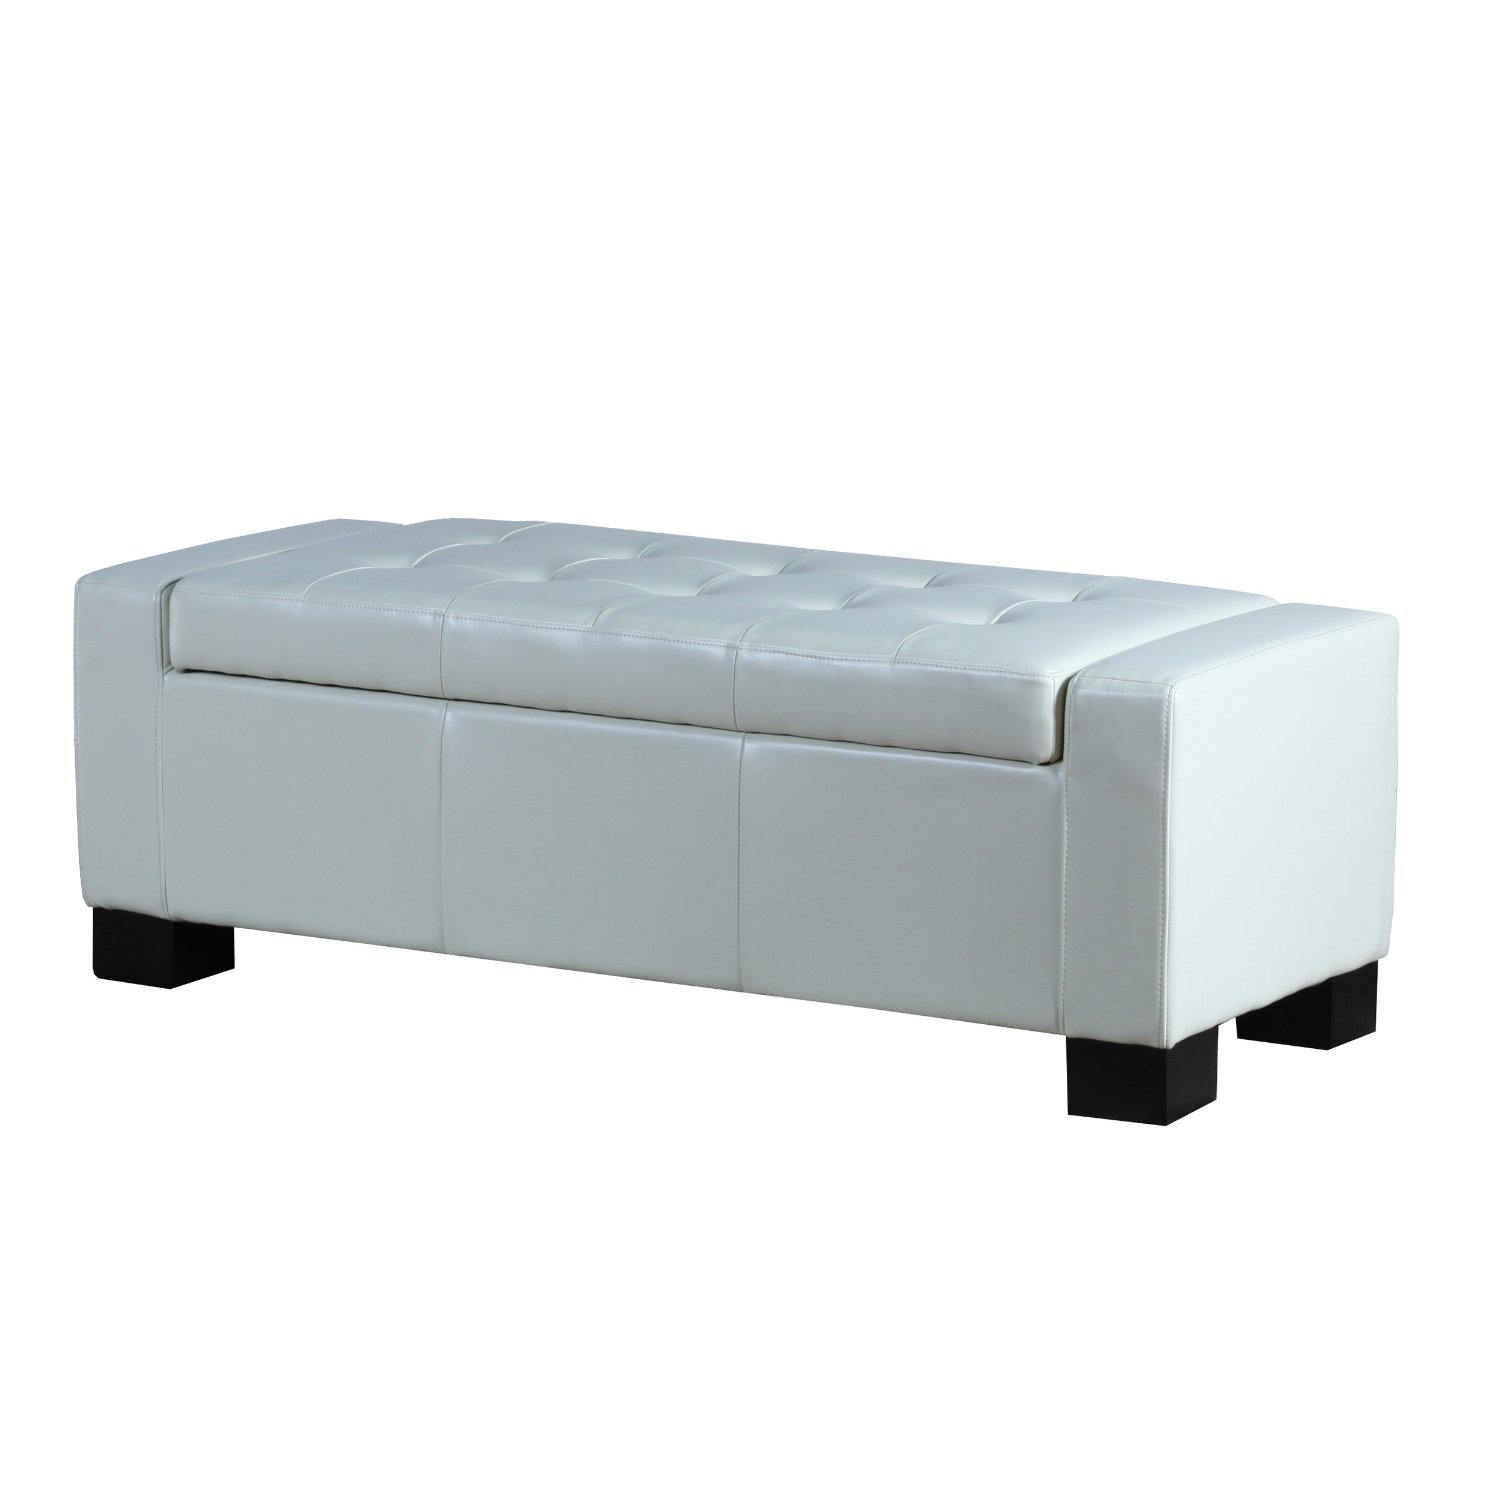 Best Selling Guernsey Leather Storage Ottoman White 